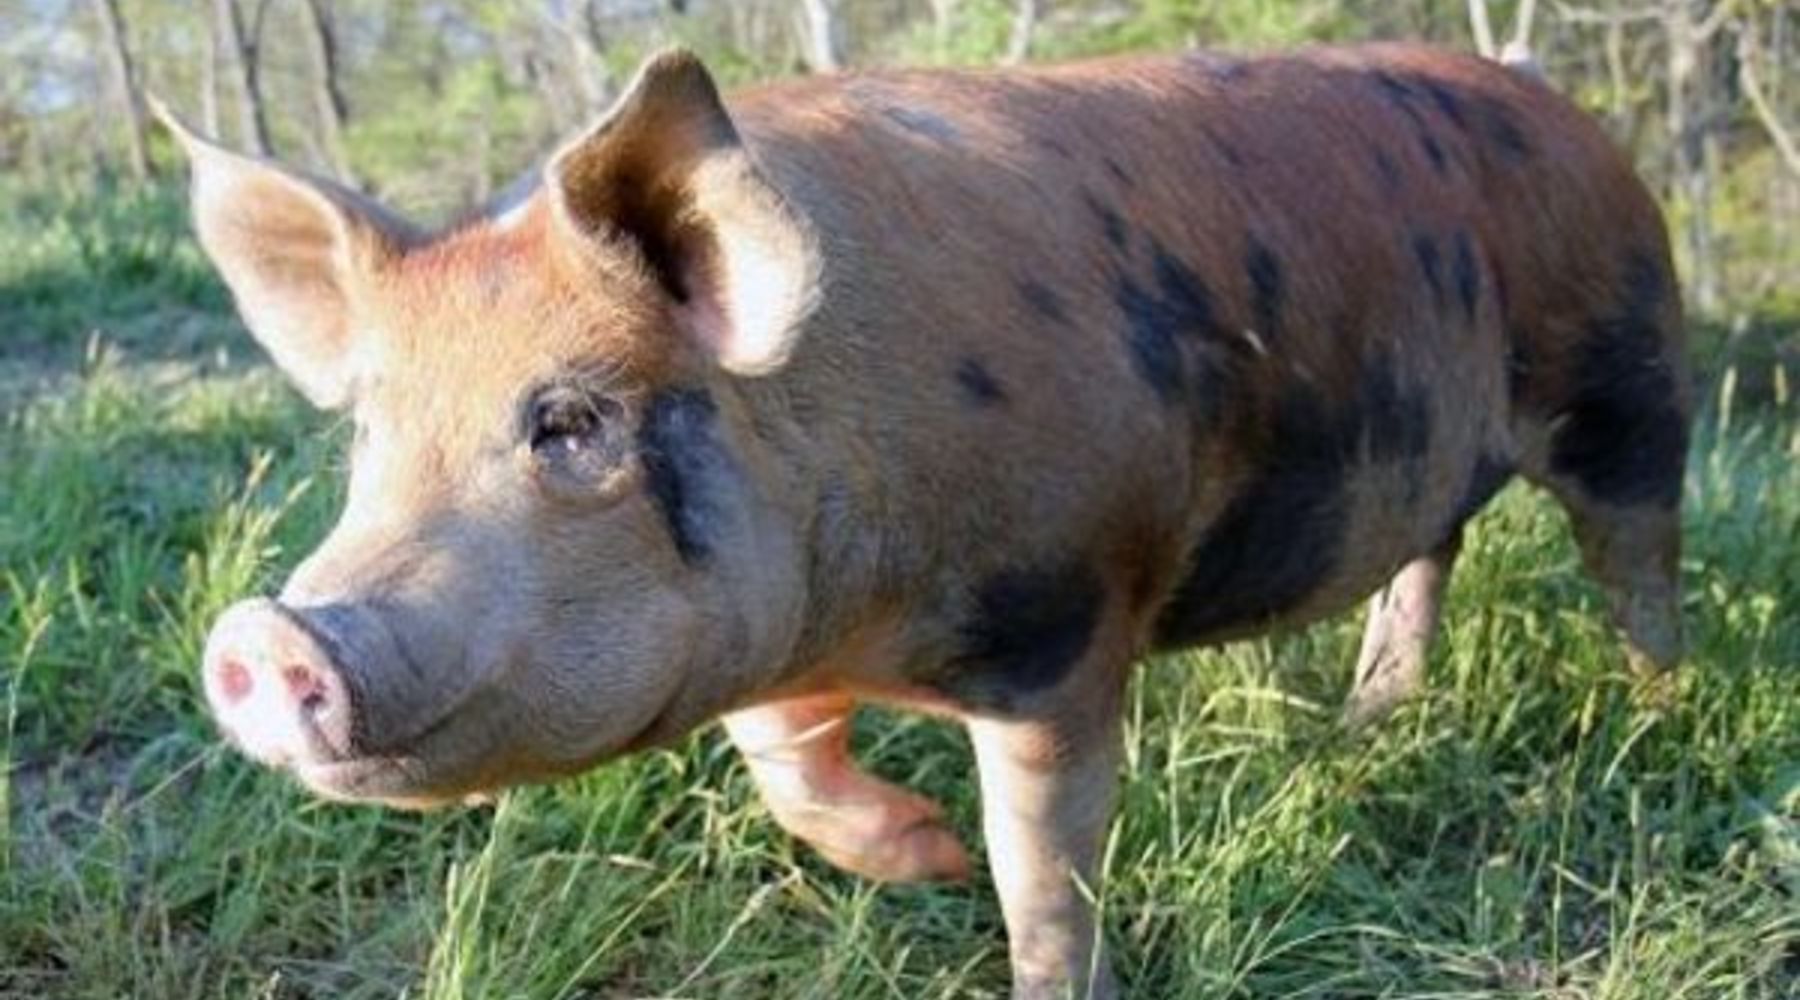 Pastured Pork and Being a Conscientious Omnivore